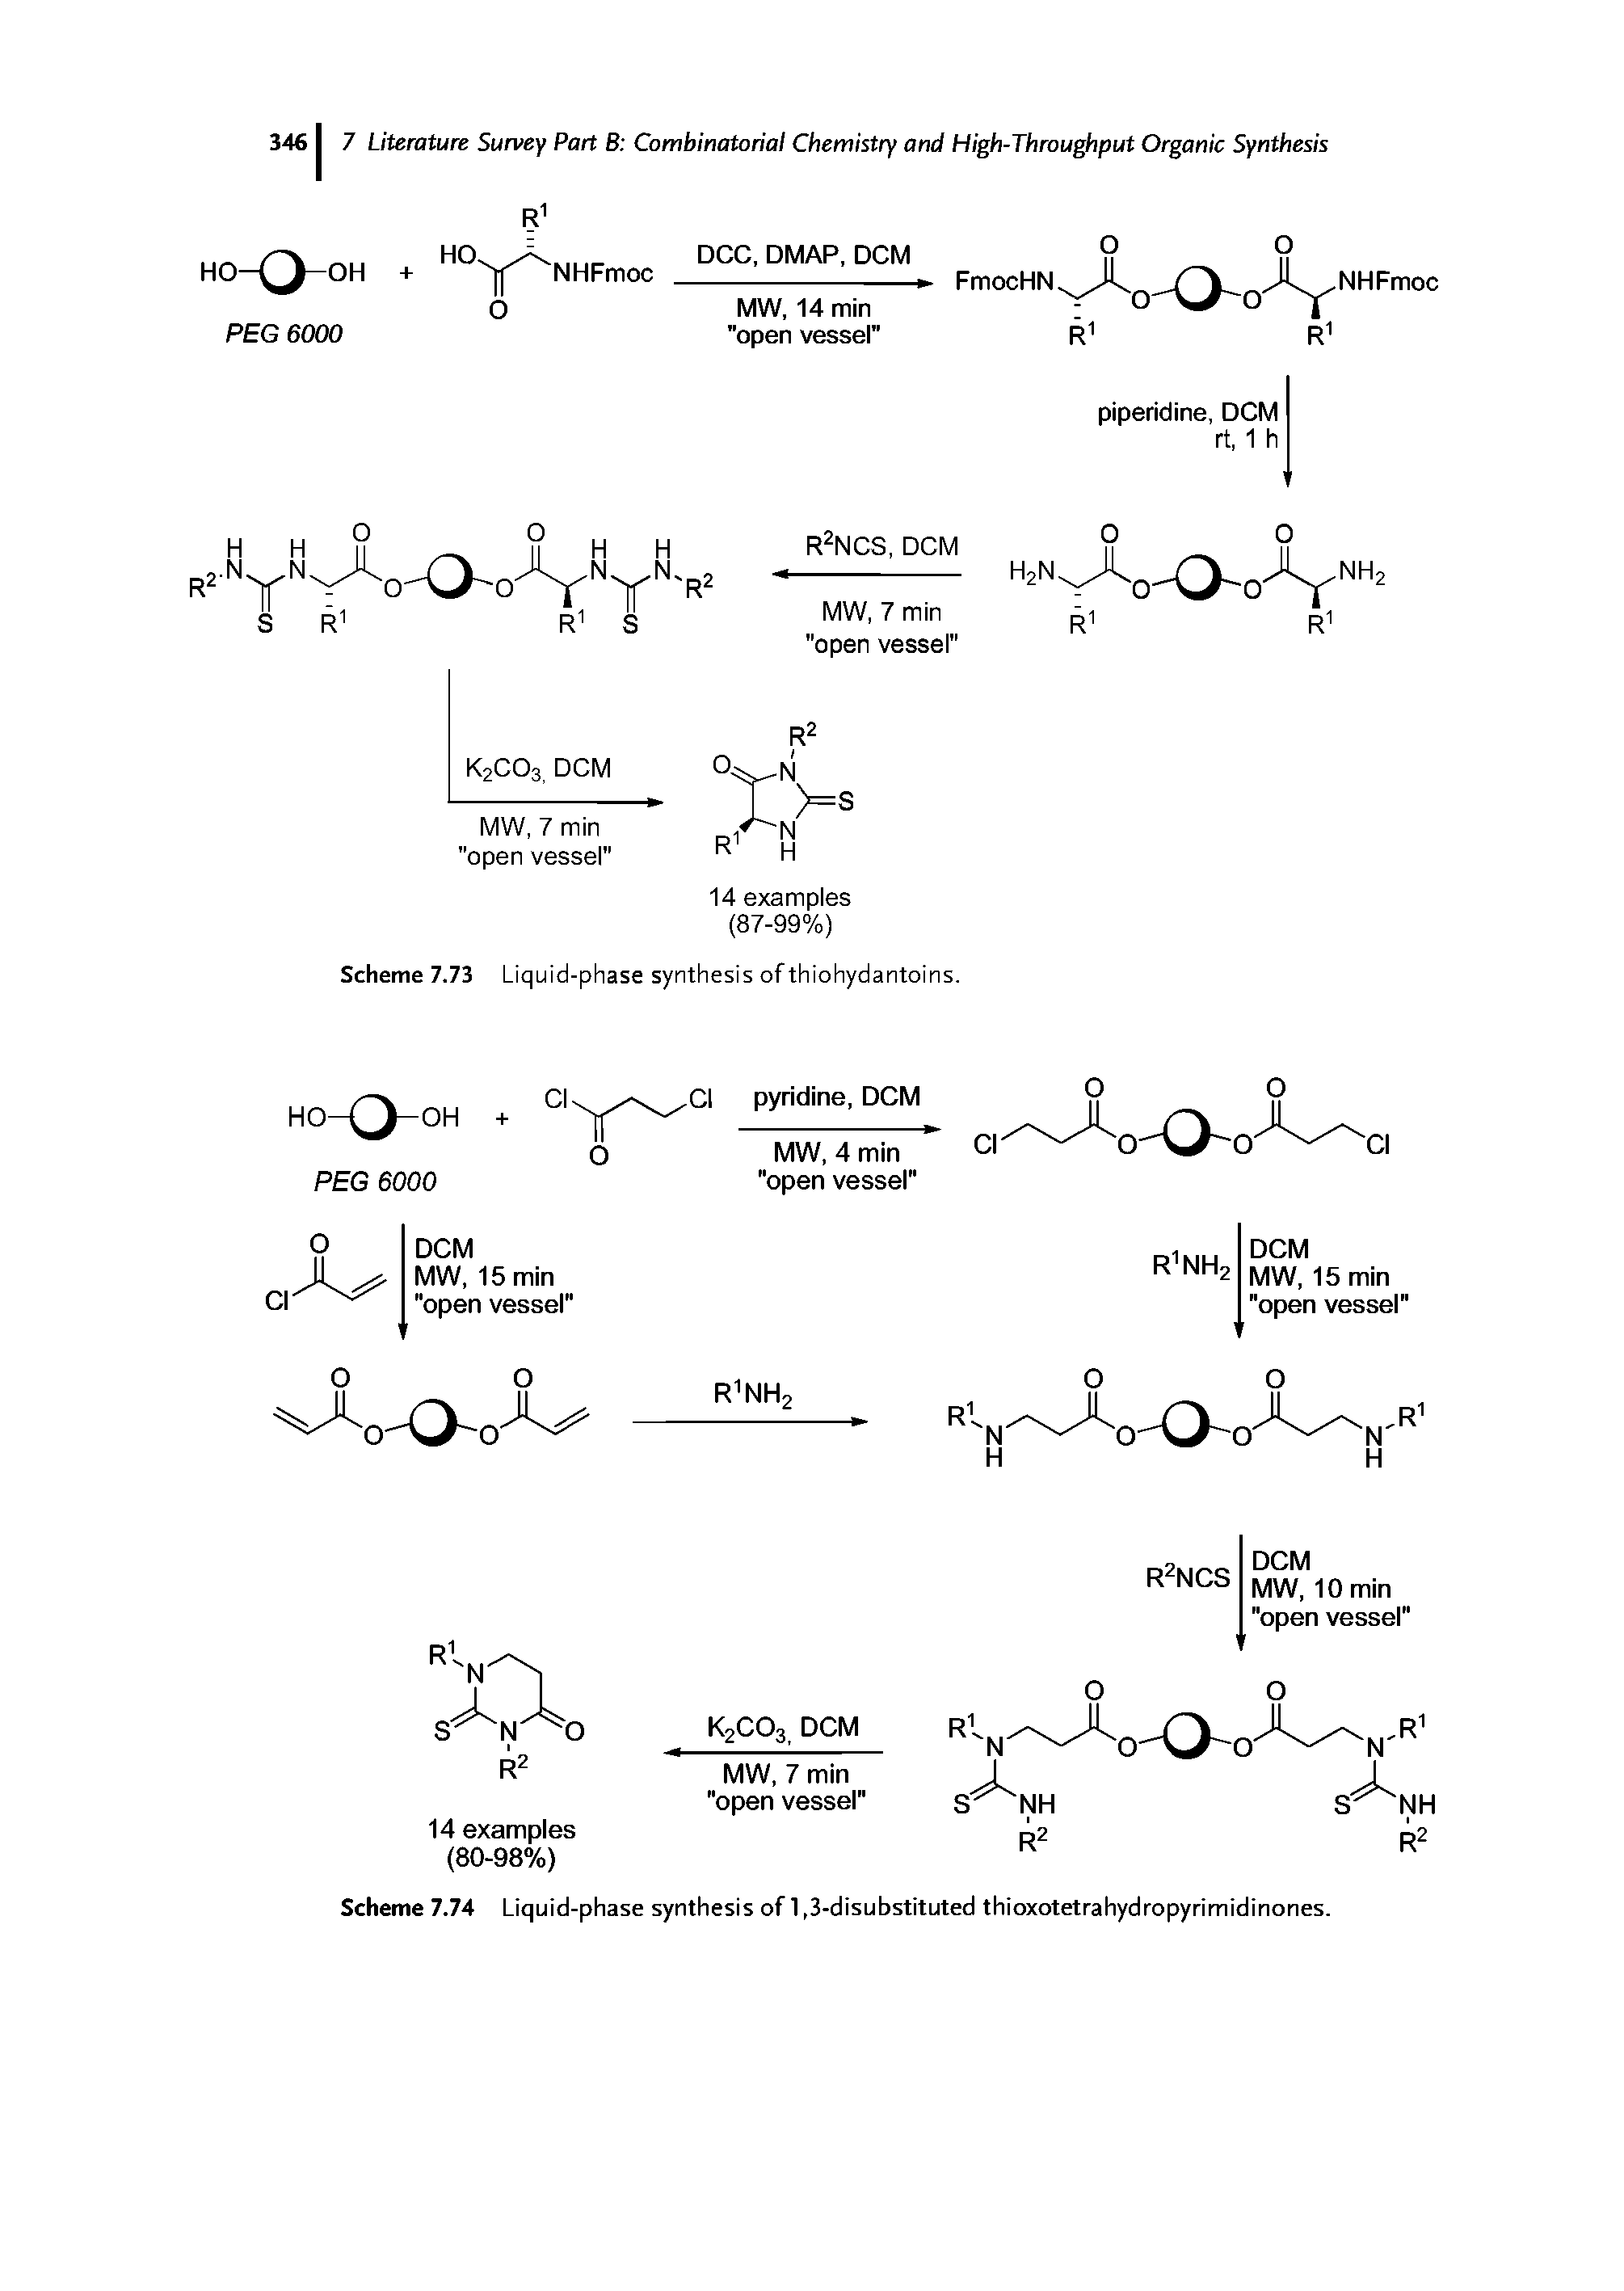 Scheme 7.74 Liquid-phase synthesis of 1,3-disubstituted thioxotetrahydropyrimidinones.